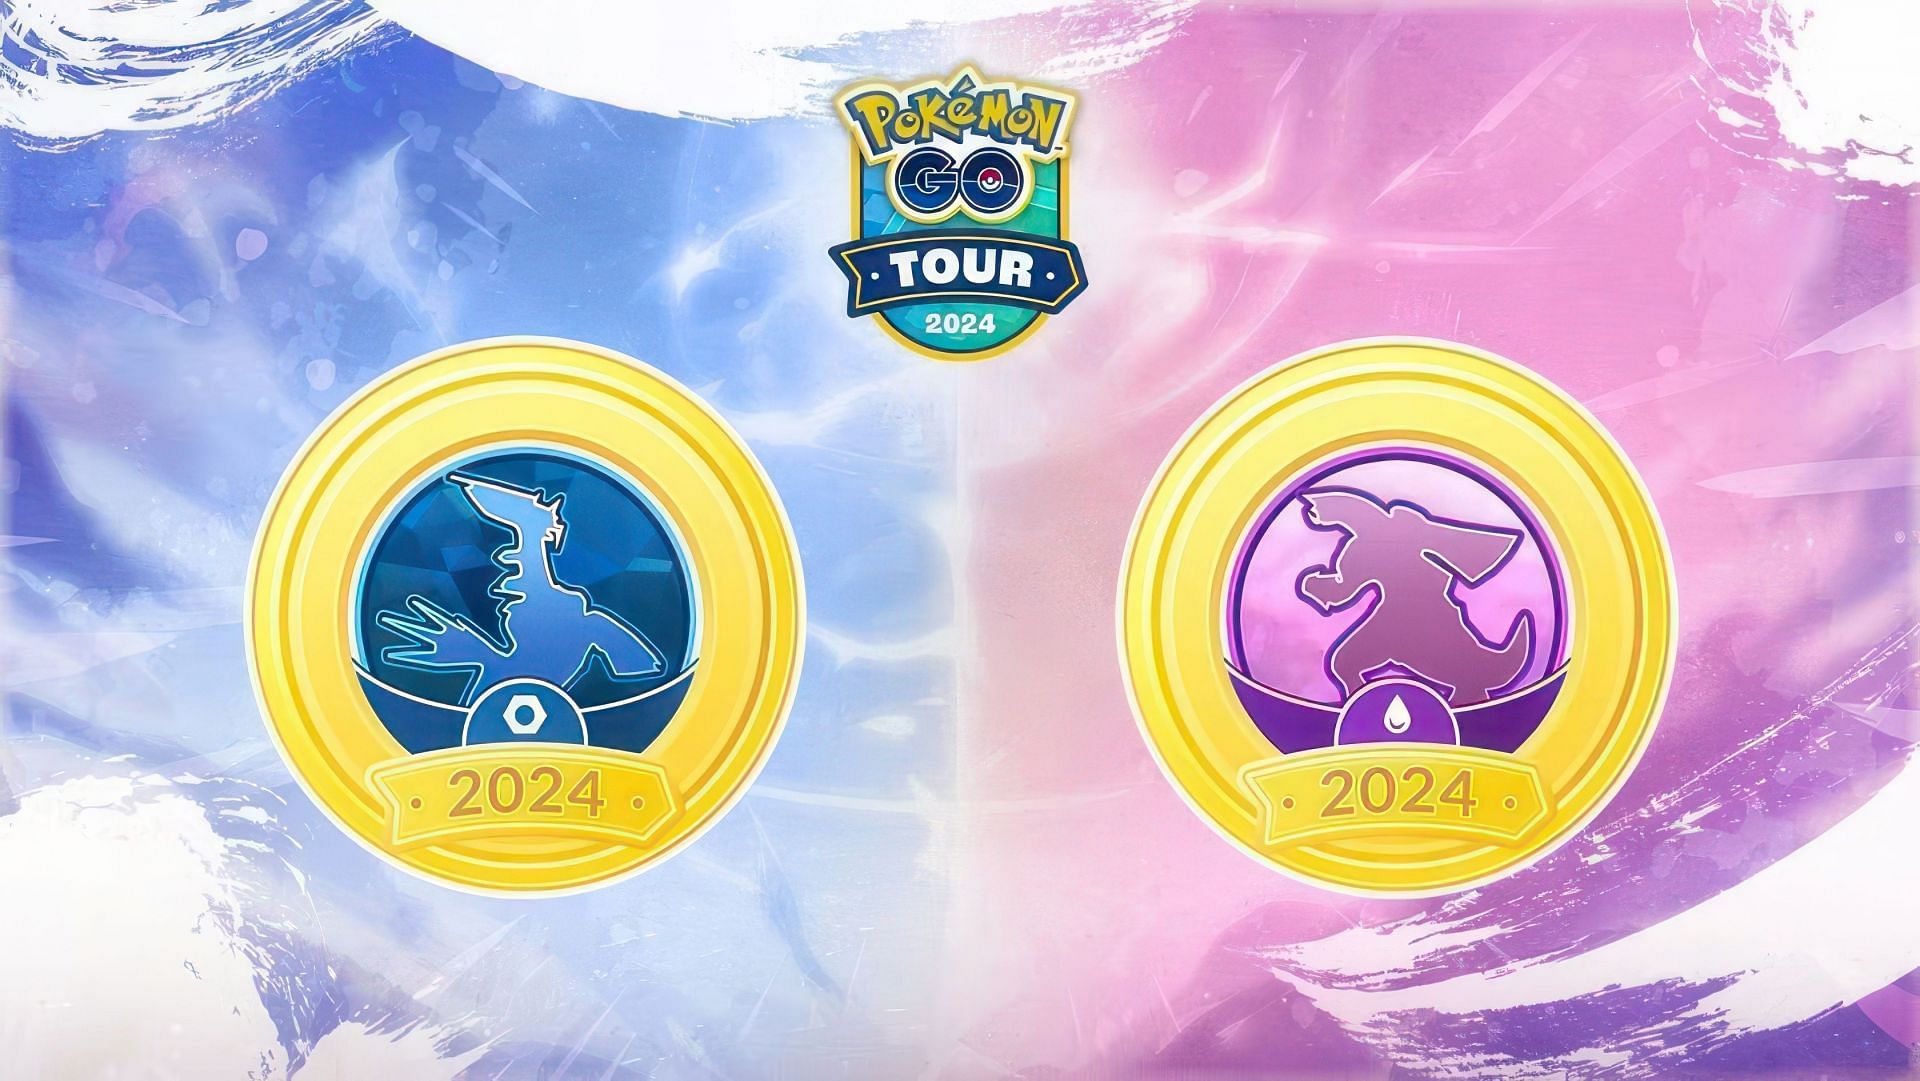 Badges related to the Dialga and Palkia (Image via Niantic)